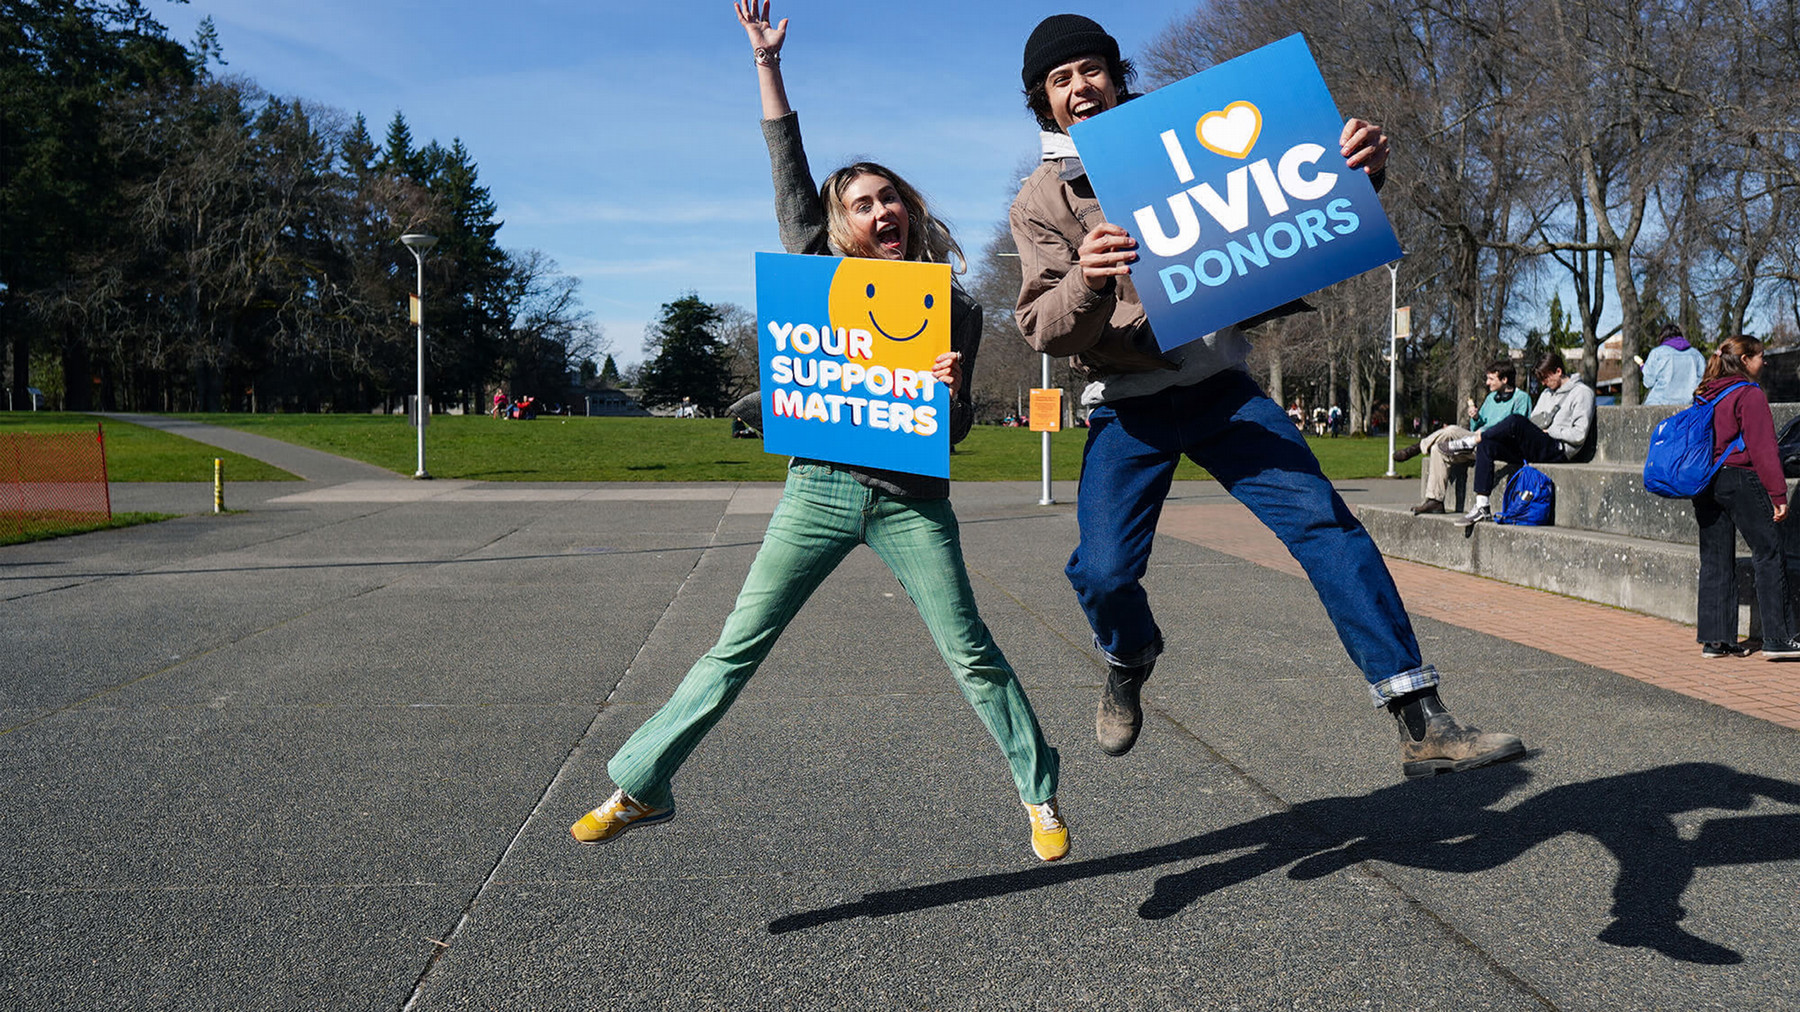 Two students smiling and jumping holding signs that read "your support matters" and "I heart UVic donors"